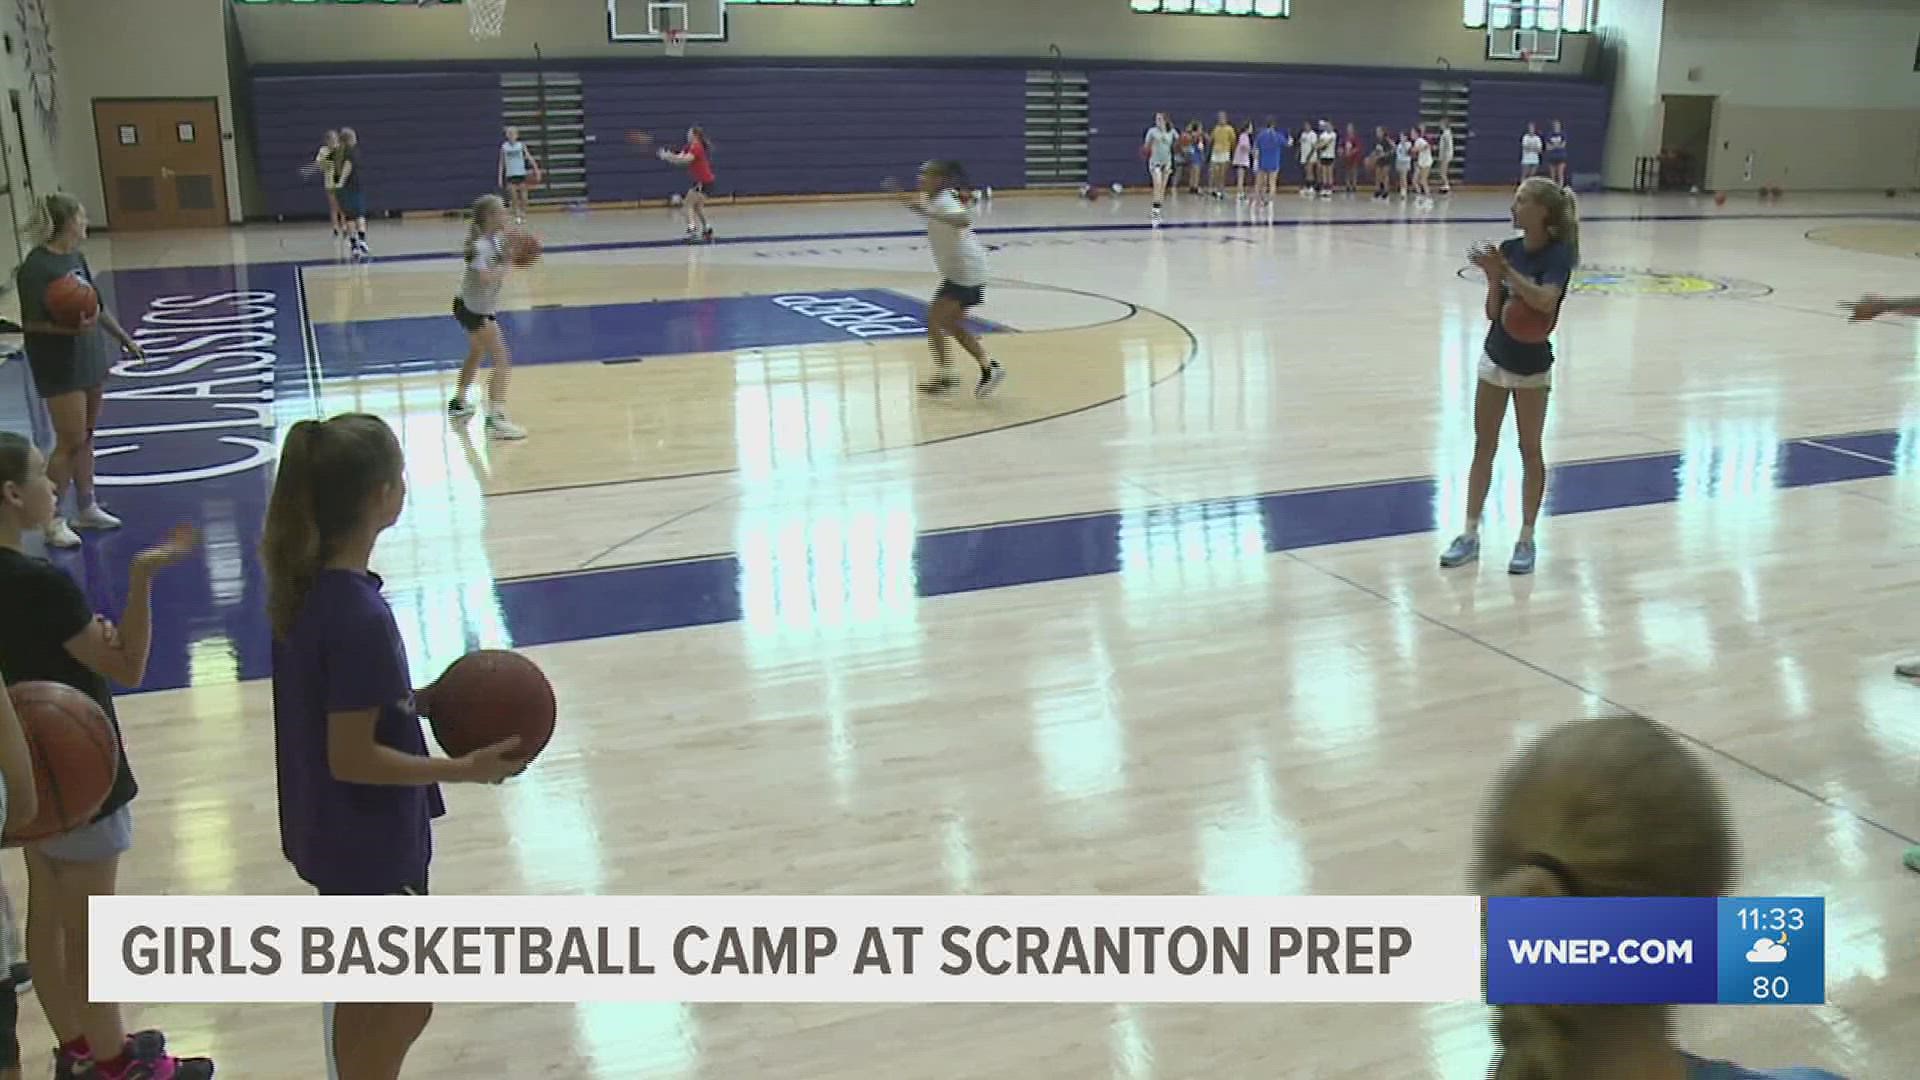 76 campers will learn new basketball skills all week long in Scranton